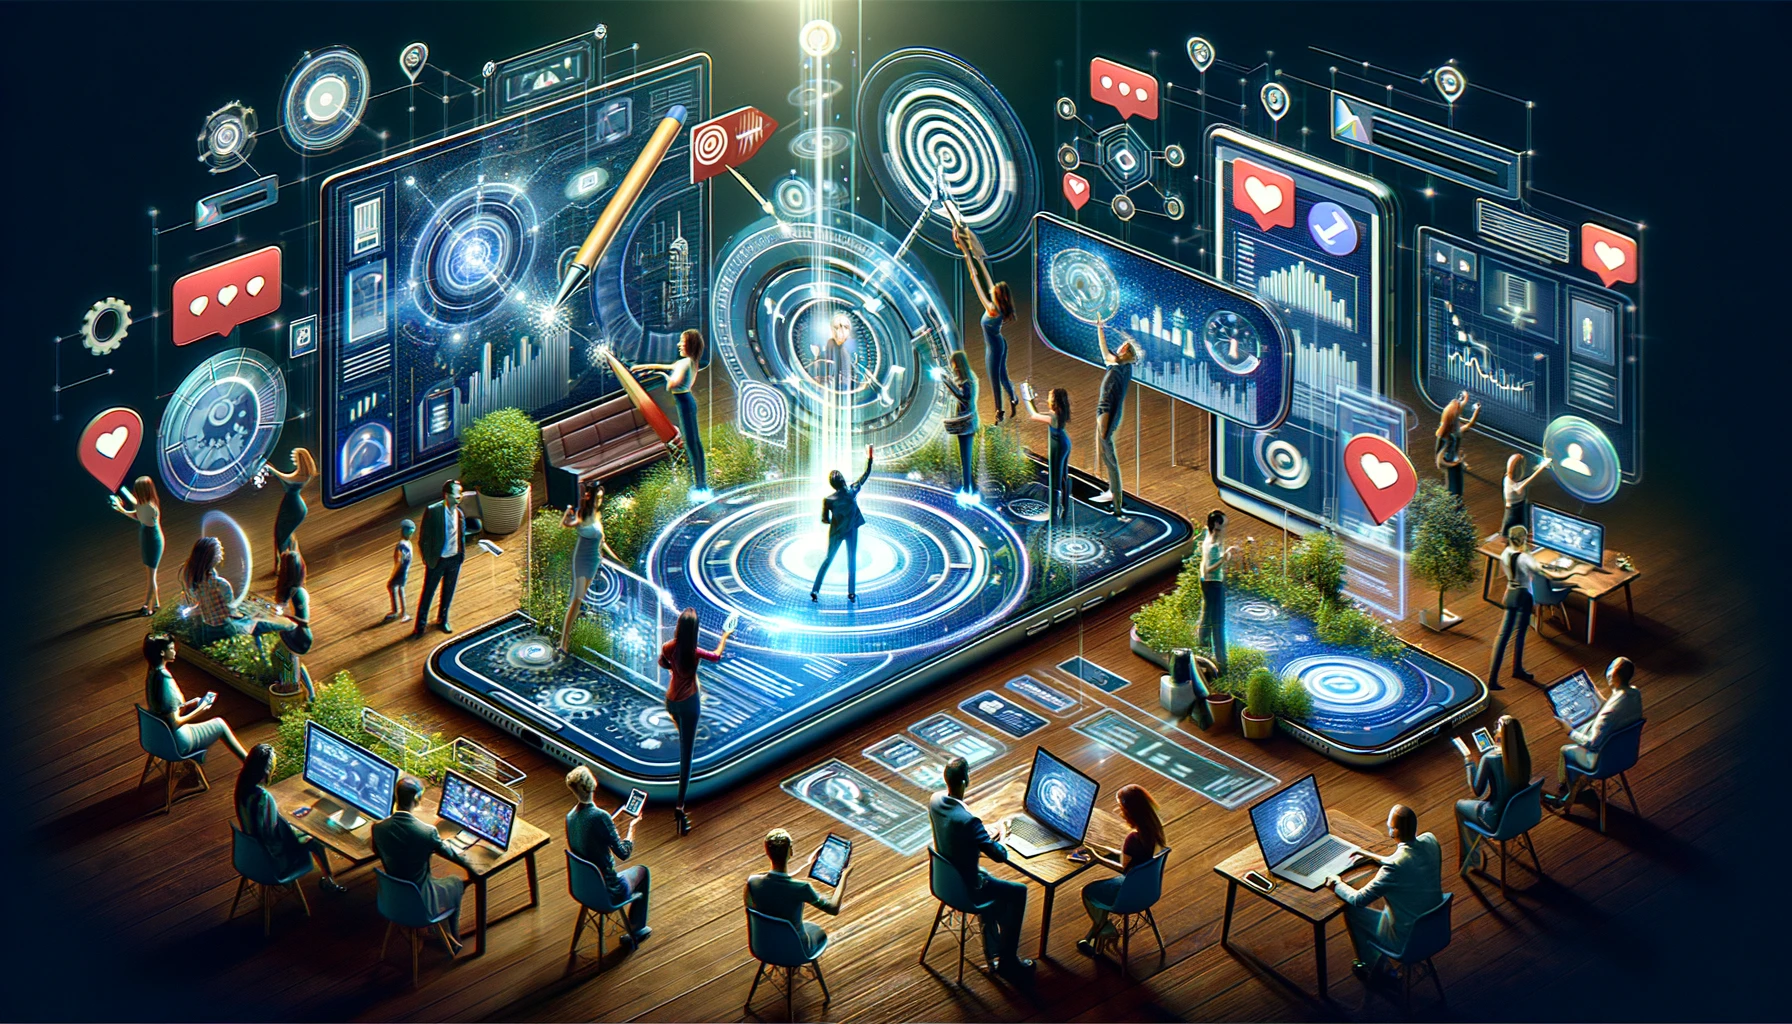 A vibrant illustration showcasing the concept of retargeting ad creative, featuring digital devices displaying personalized ads, with icons representing data analysis and audience engagement surrounding them.